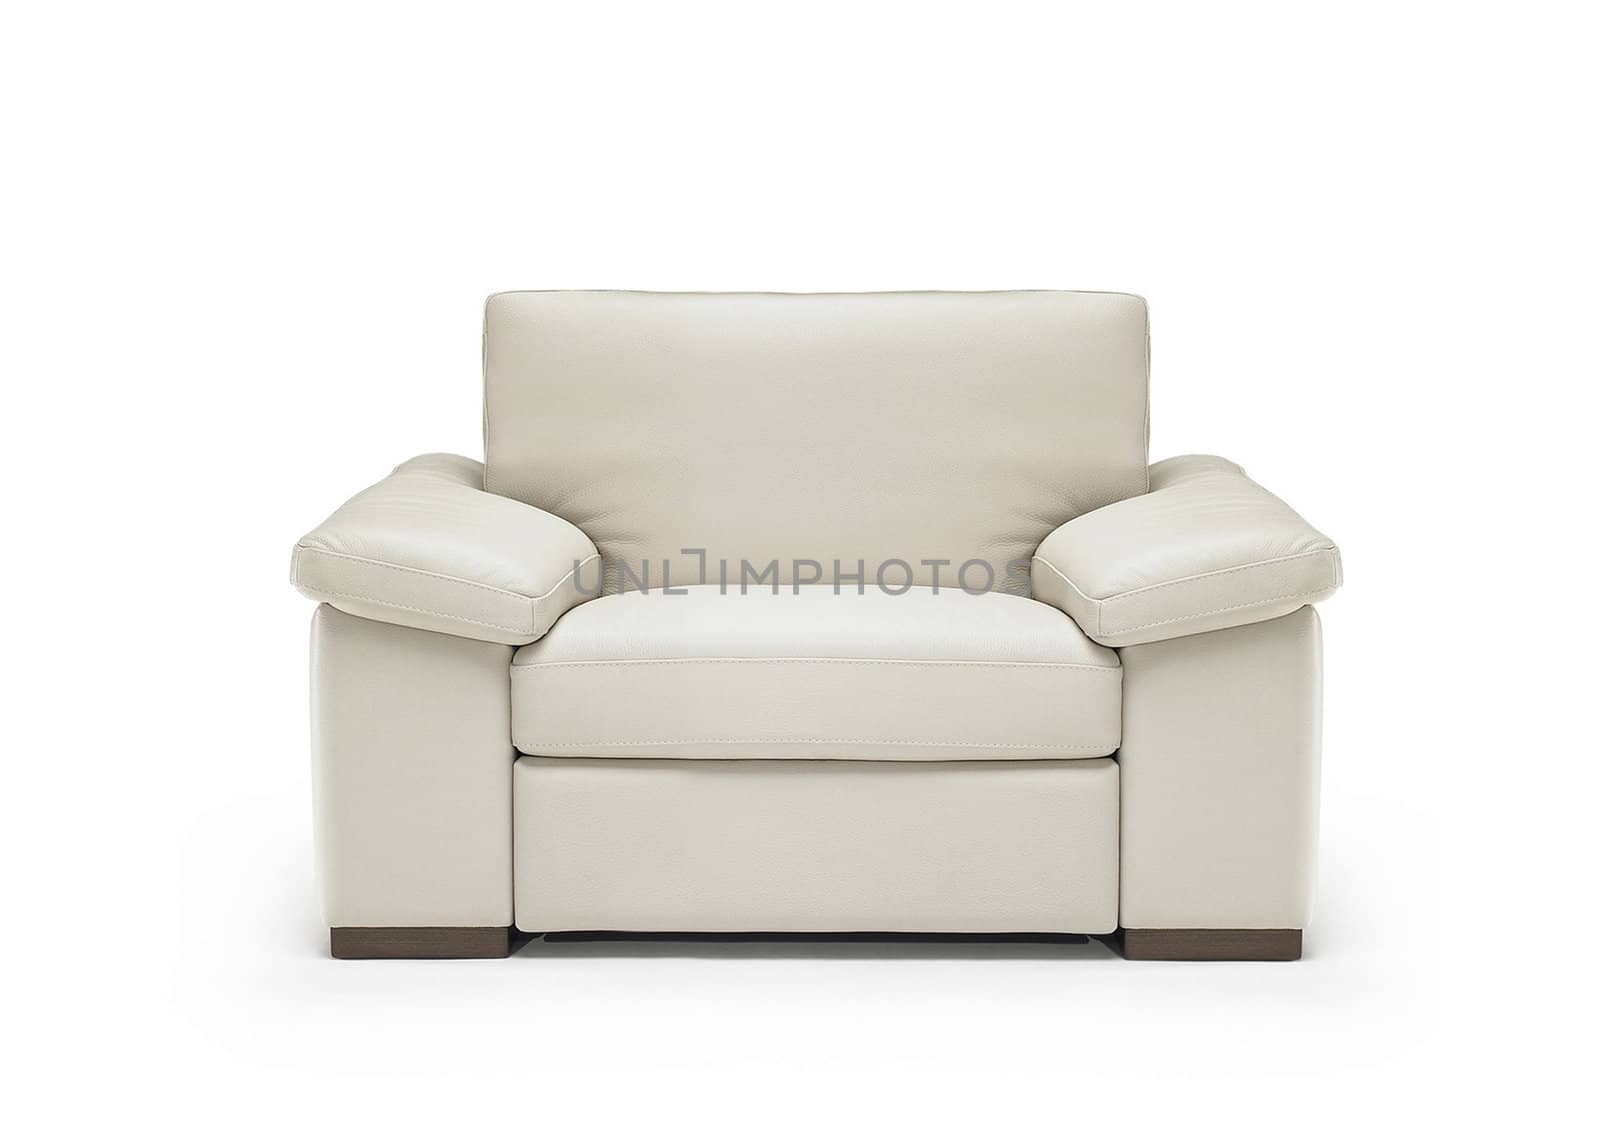 Image of a modern leather armchair isolated